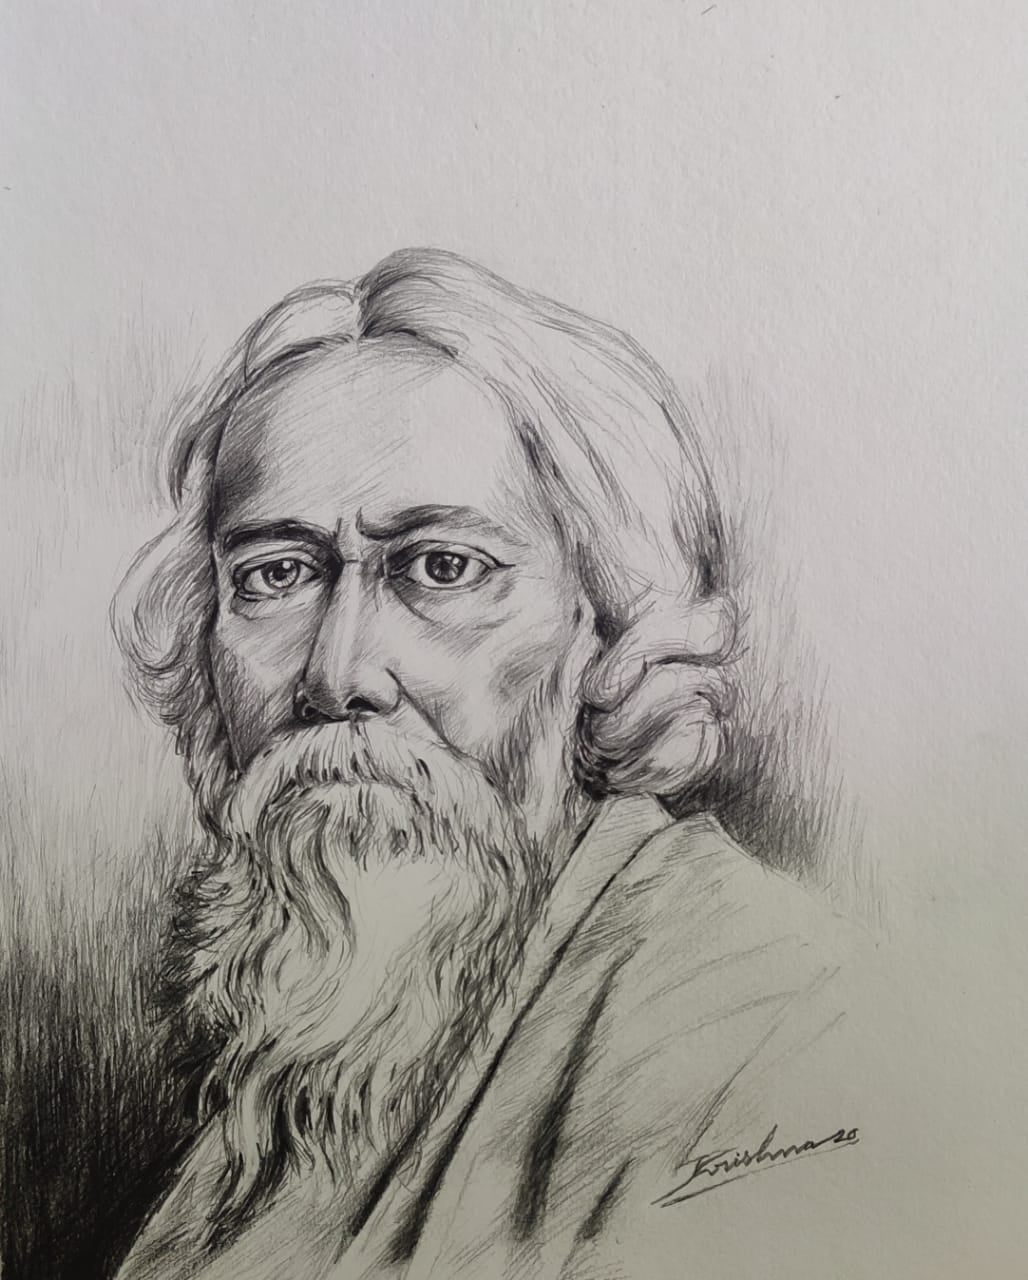 A quick sketch of Rabindranath Tagore  WIP by Praveen Hegde on Dribbble